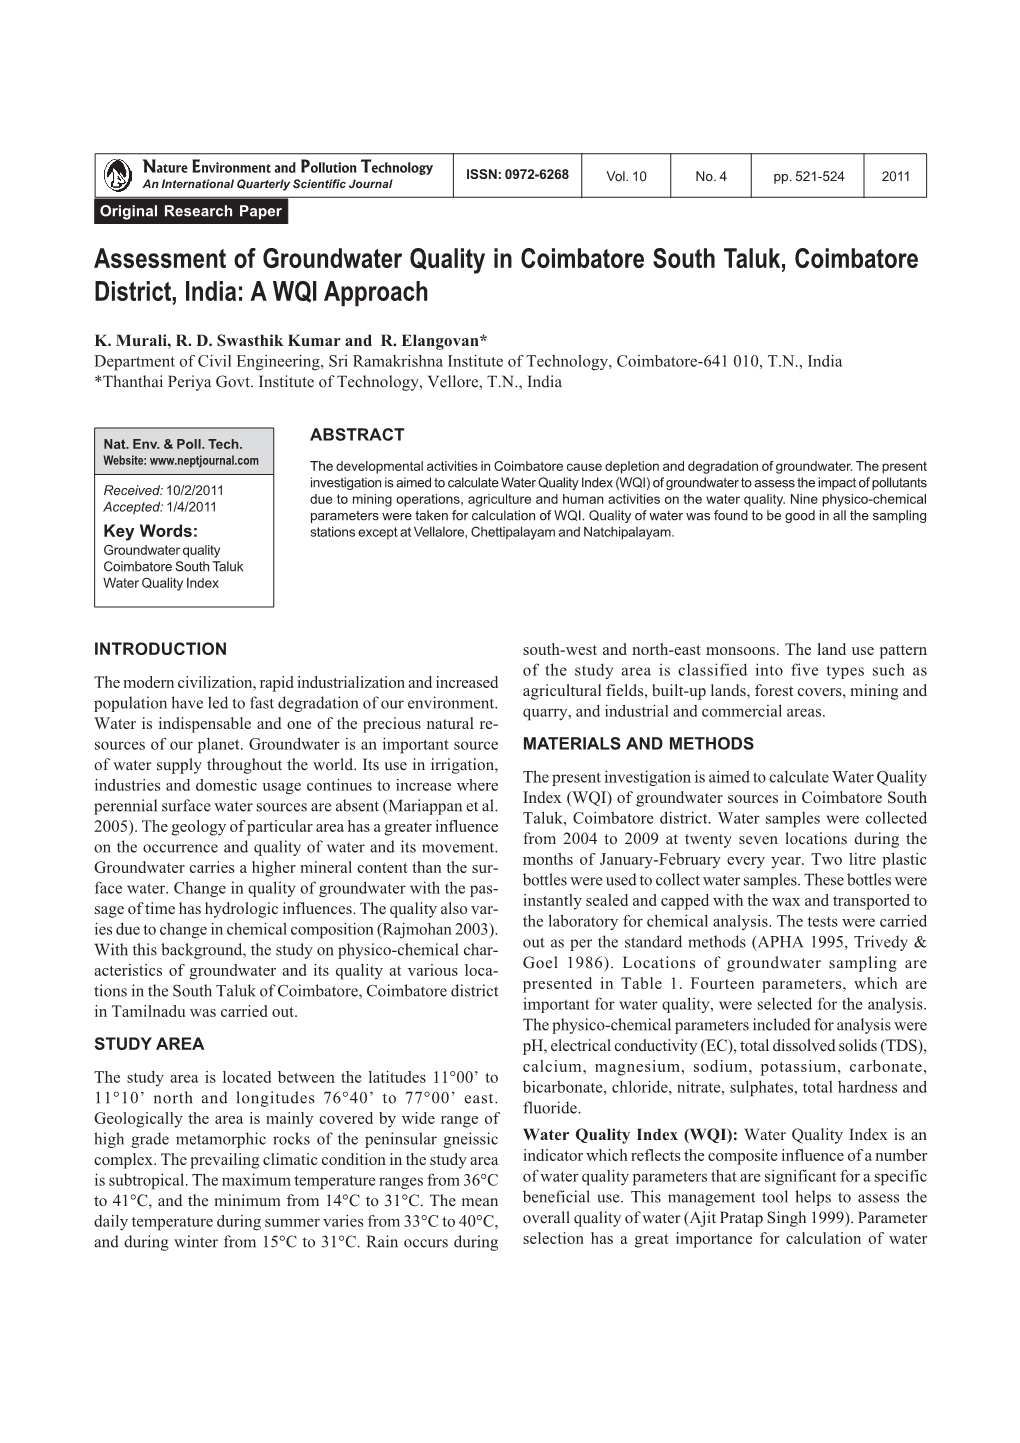 Assessment of Groundwater Quality in Coimbatore South Taluk, Coimbatore District, India: a WQI Approach